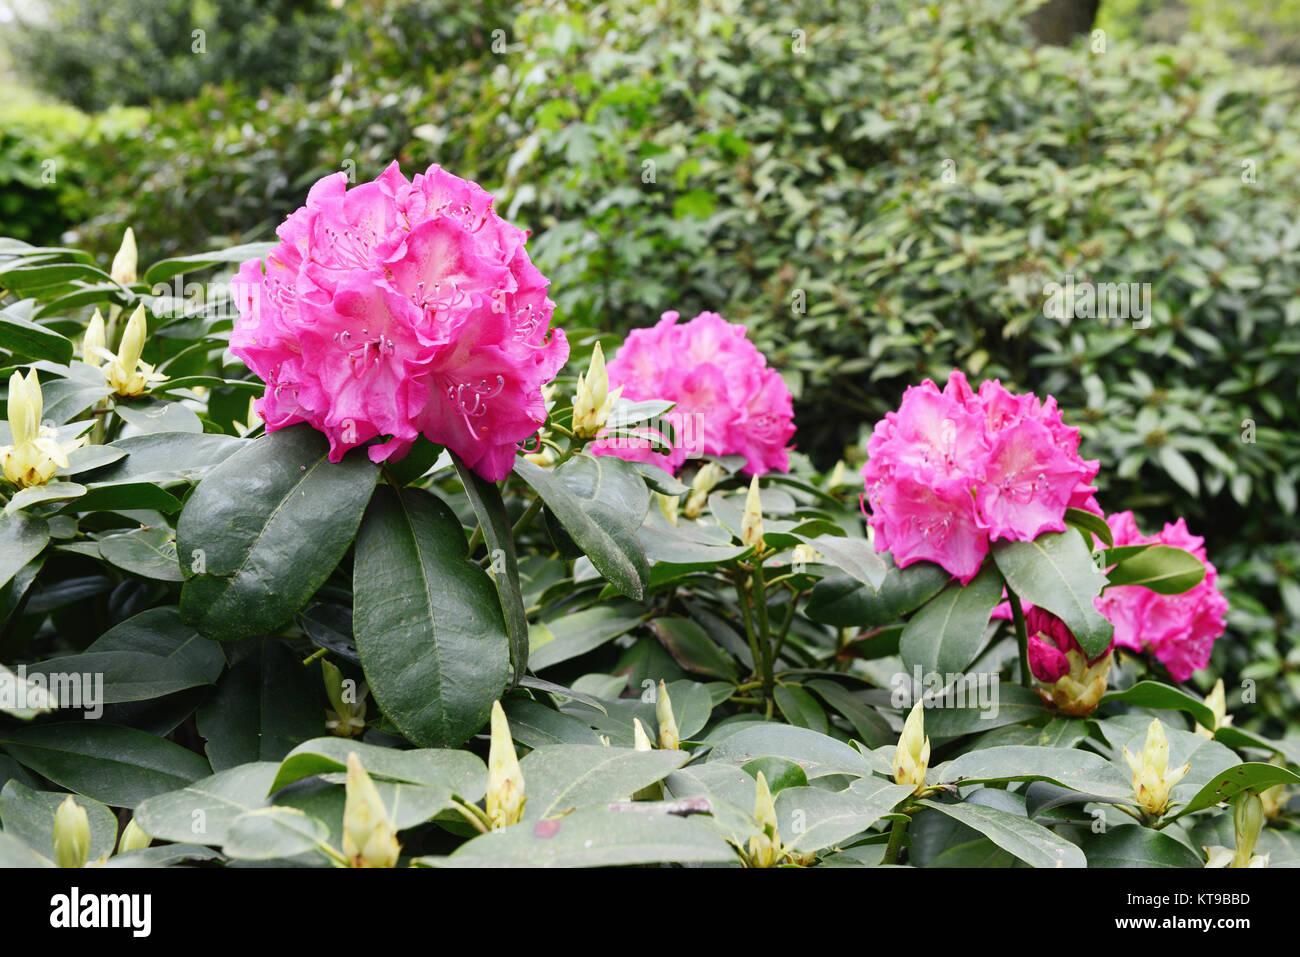 Rhododendron bush bloosom on springtime. Pink buds and flowerheads. Stock Photo